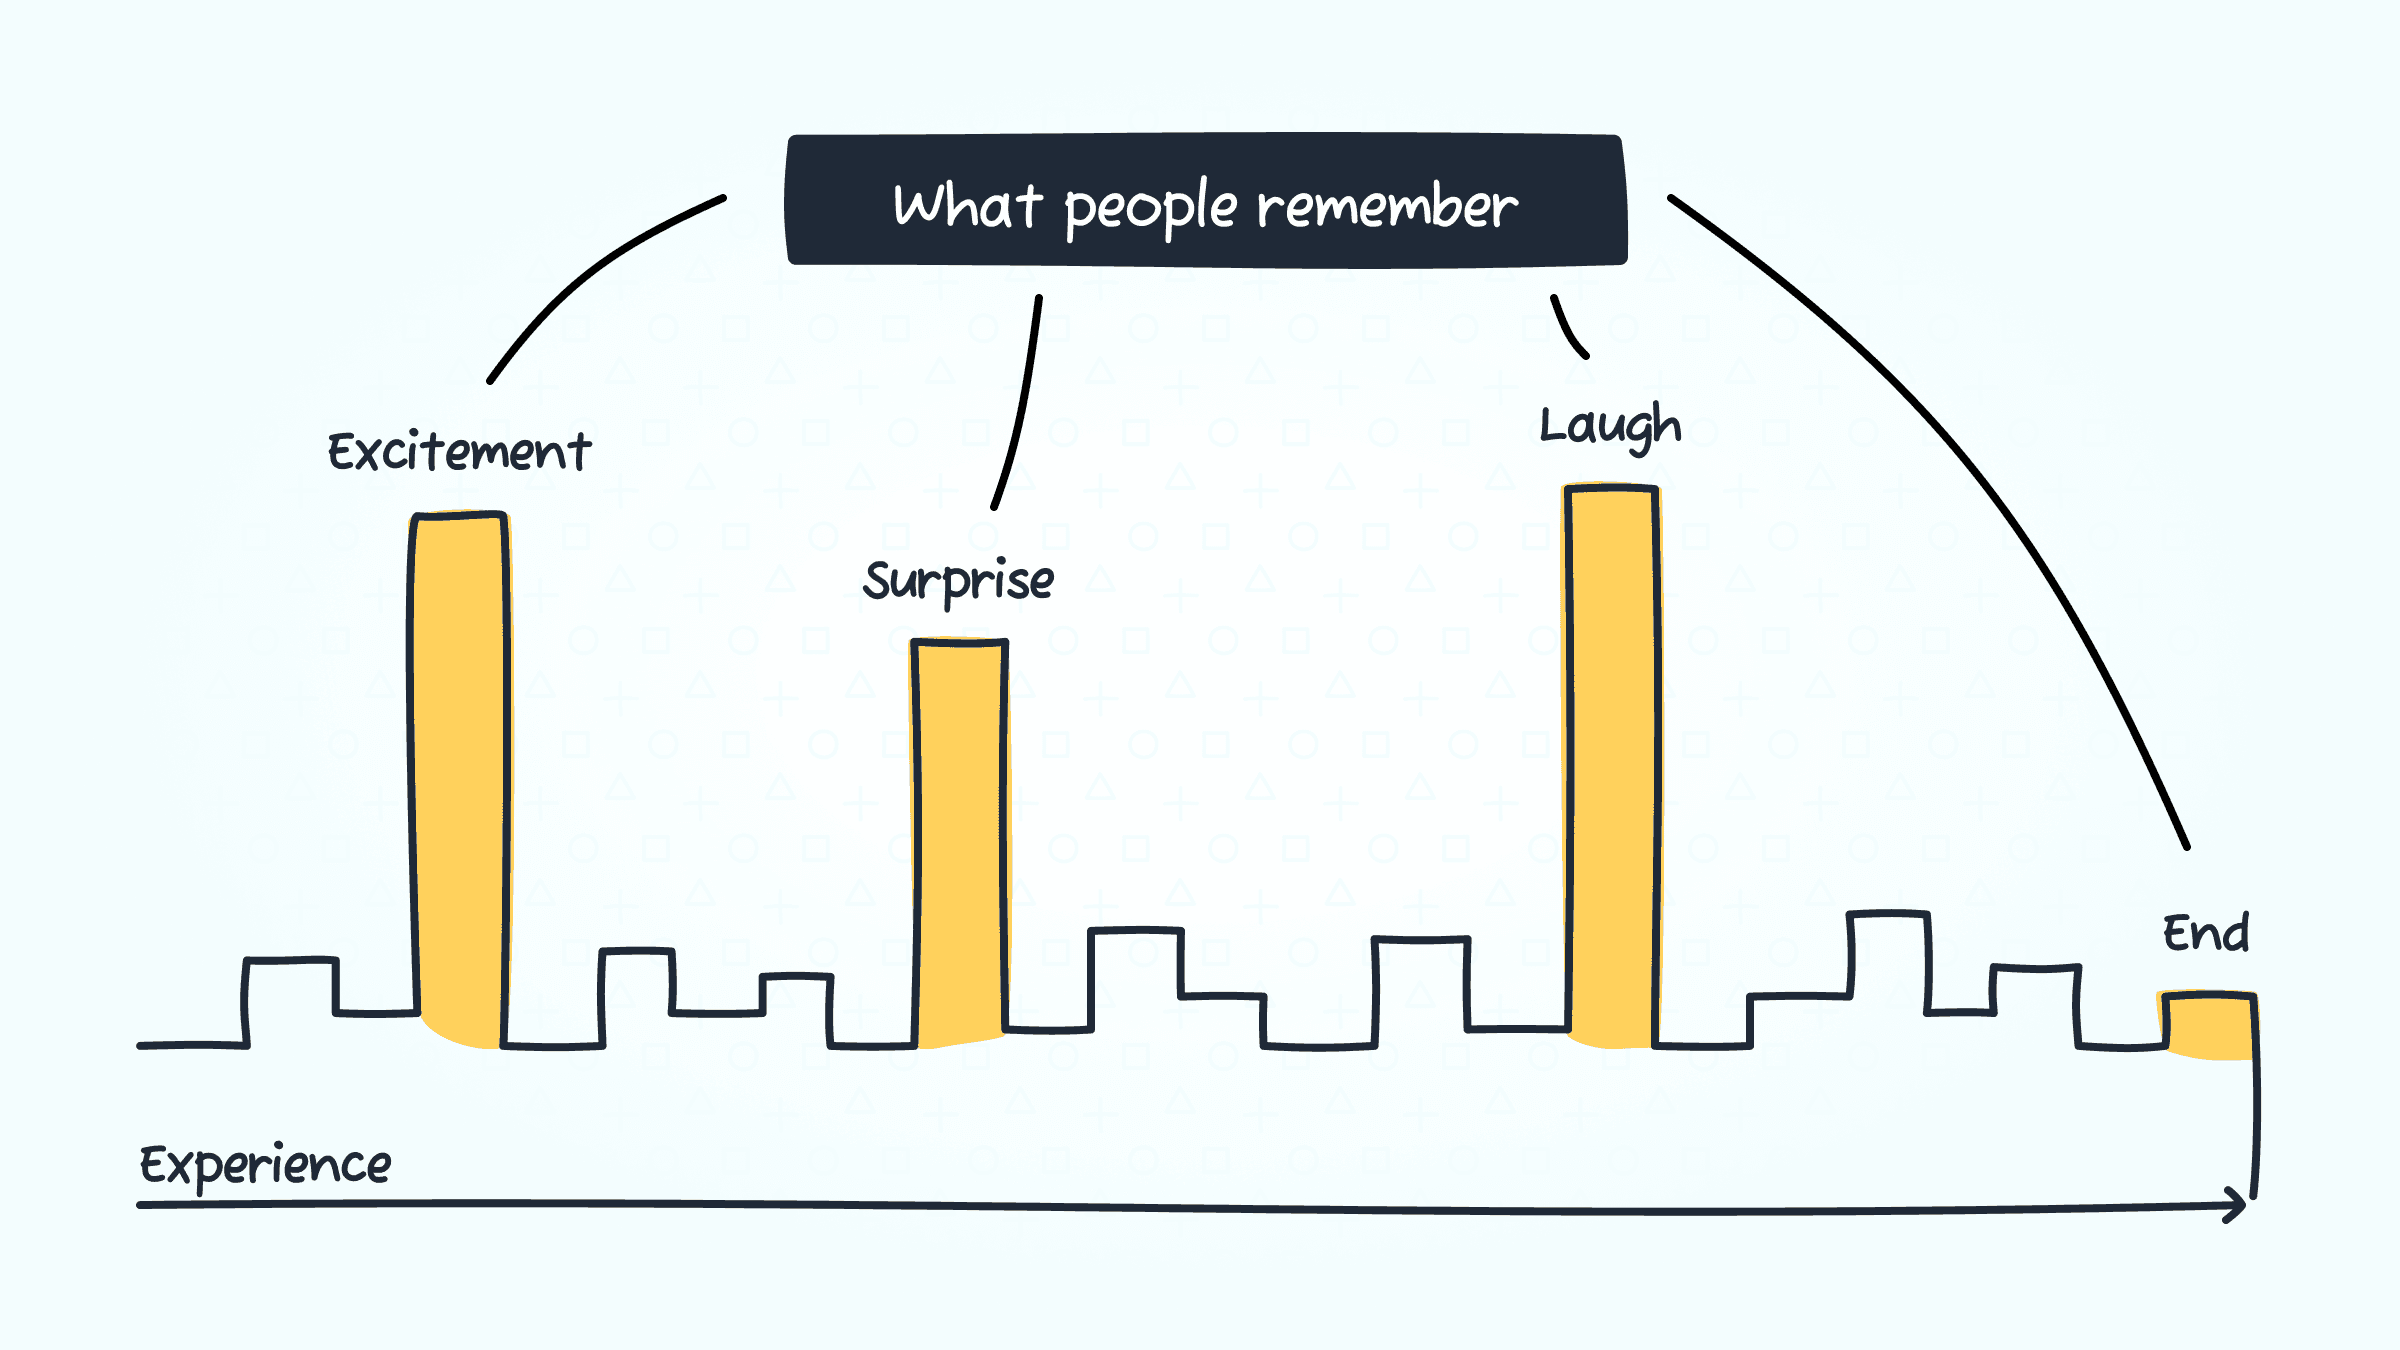 People mostly remember moments of excitement, surprise, laughter, and the ending of an experience